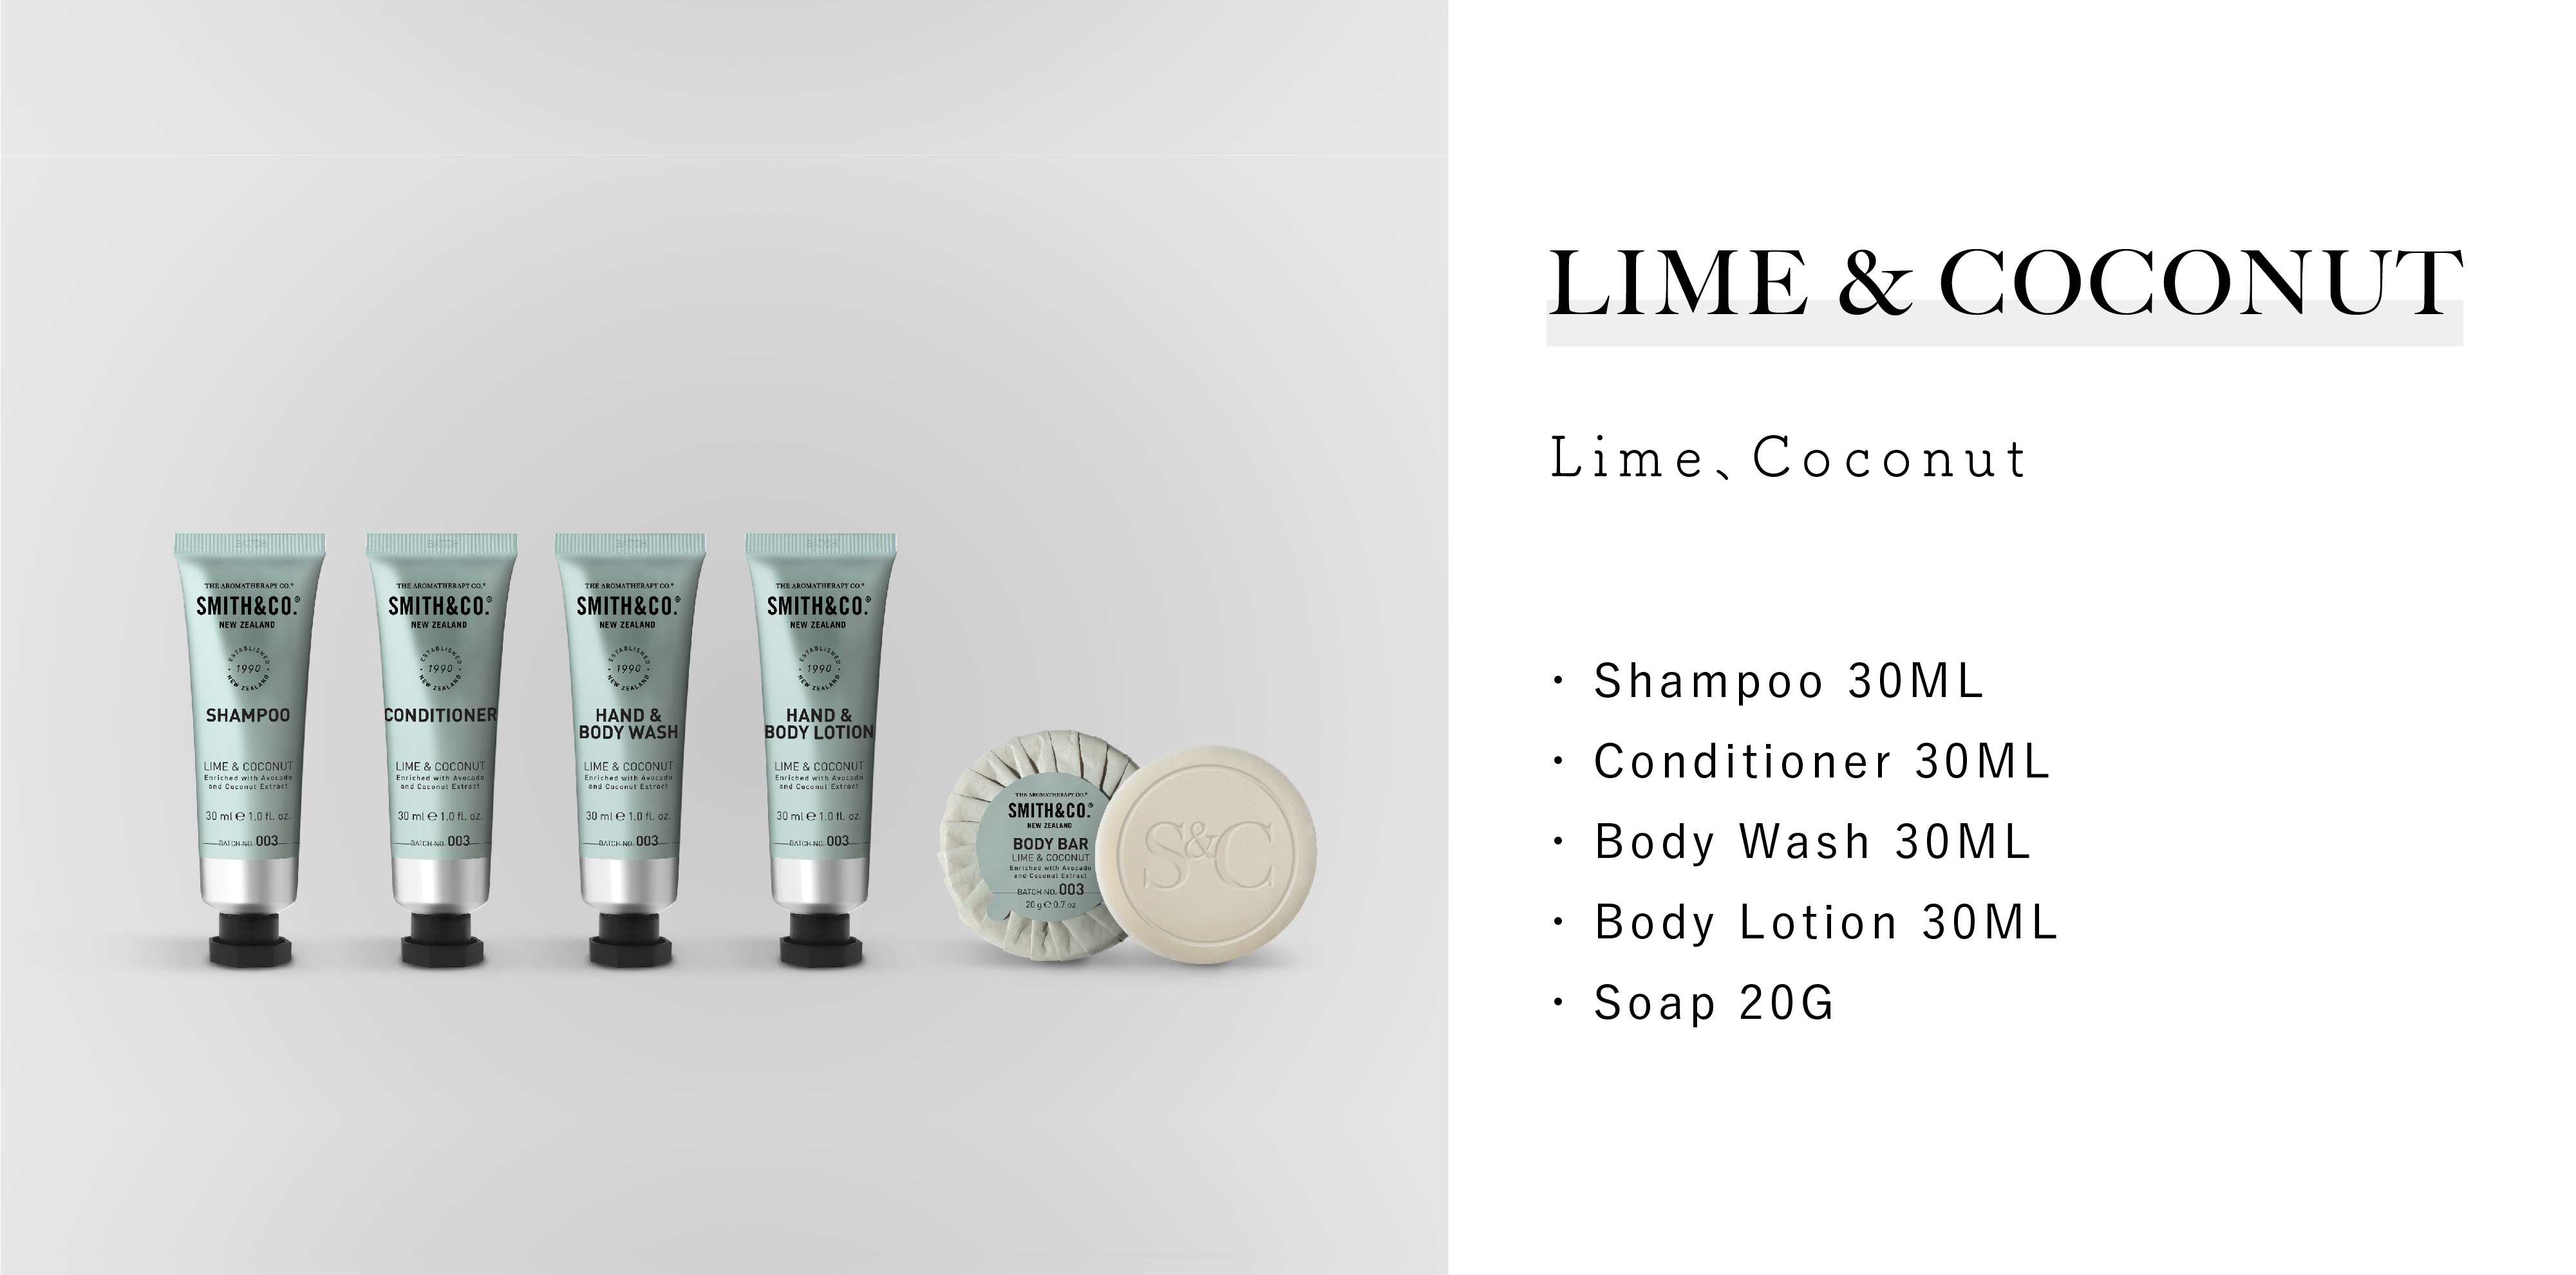 The Aromatherapy Co.的飯店沐浴用品Smith&Co Lime&Coconut系列，由Sunlife晨居飯店沐浴備品廠商供應